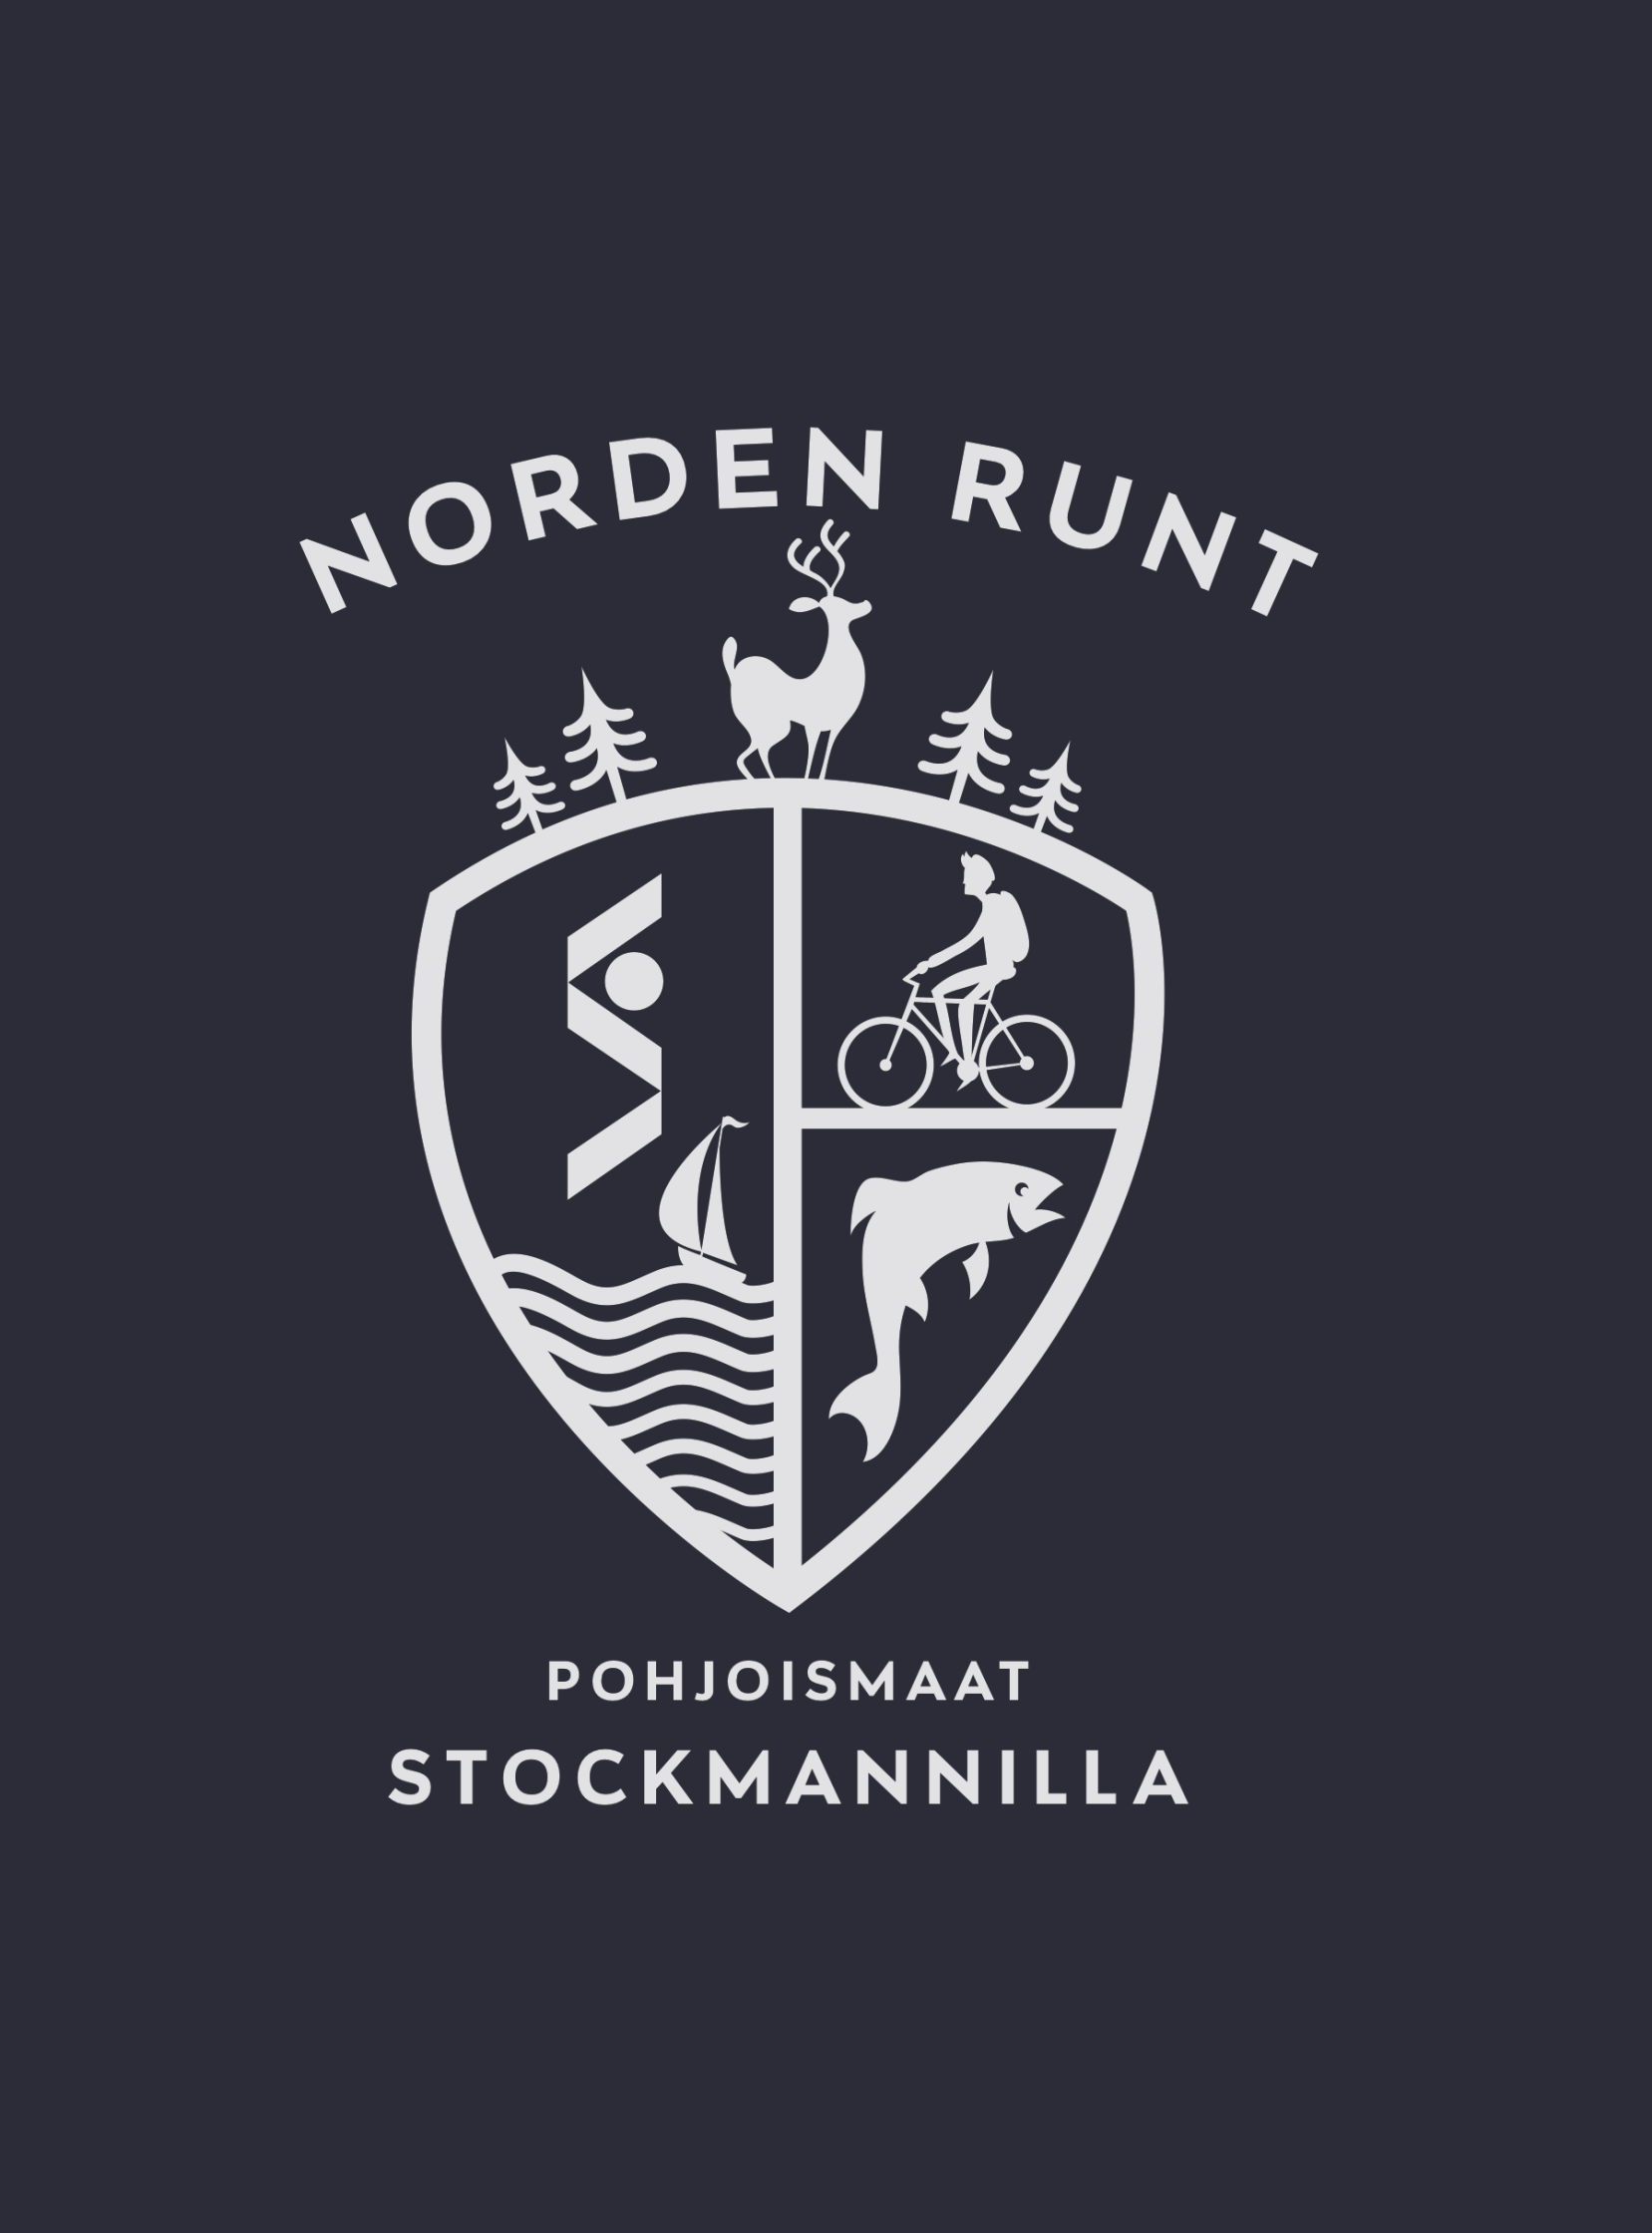 StockmannNorden.png